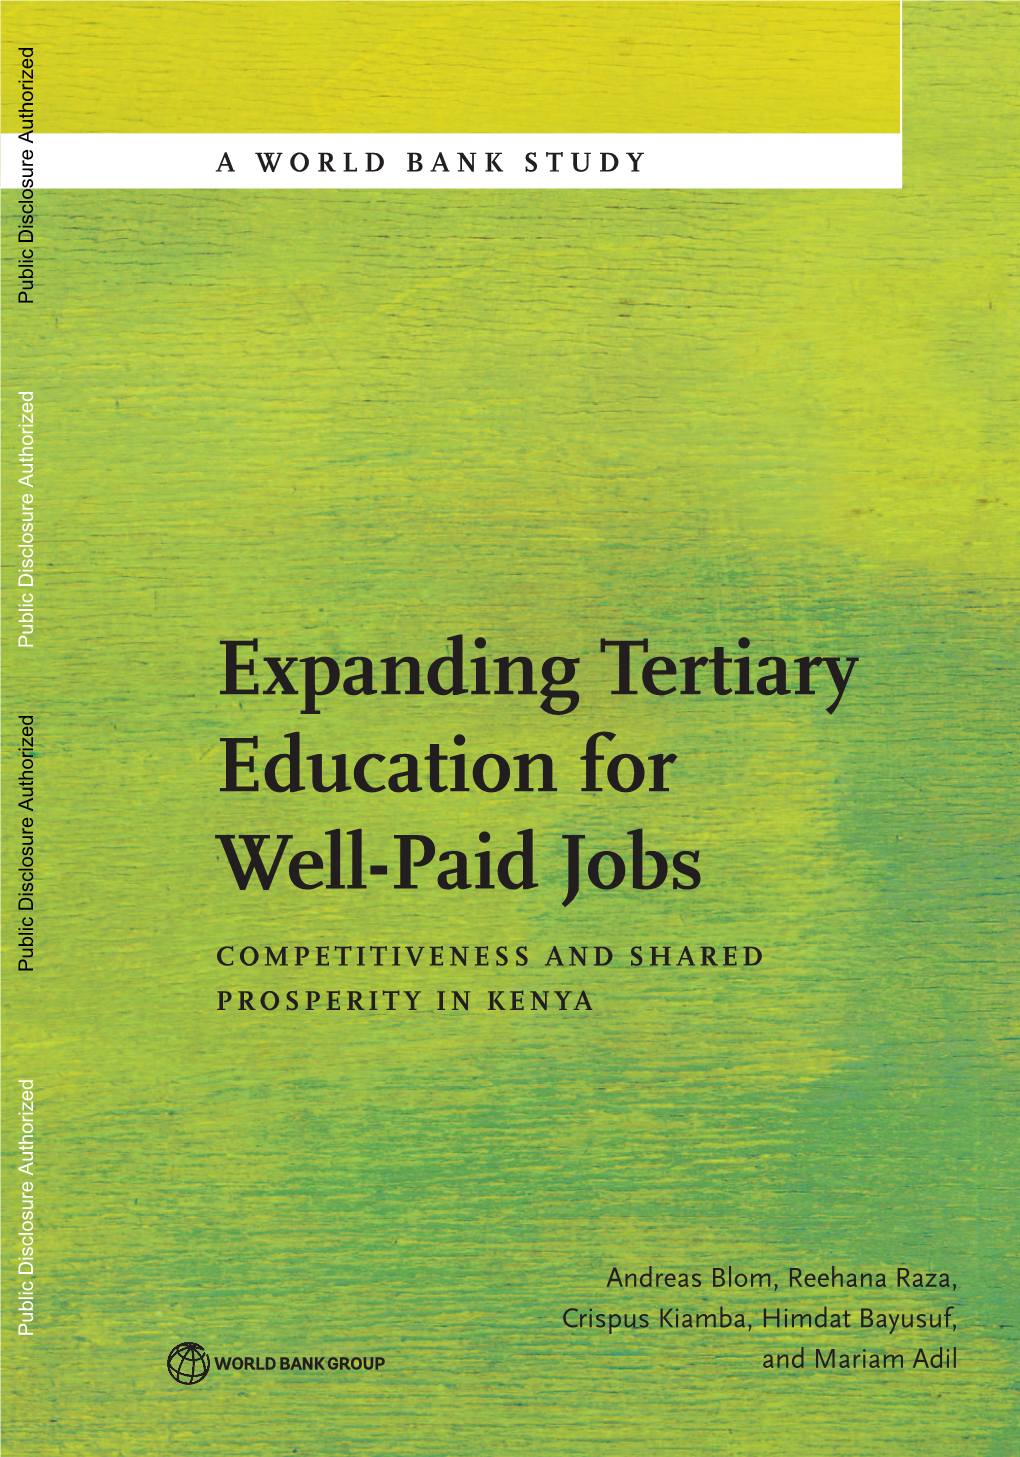 Expanding Tertiary Education for Well-Paid Jobs